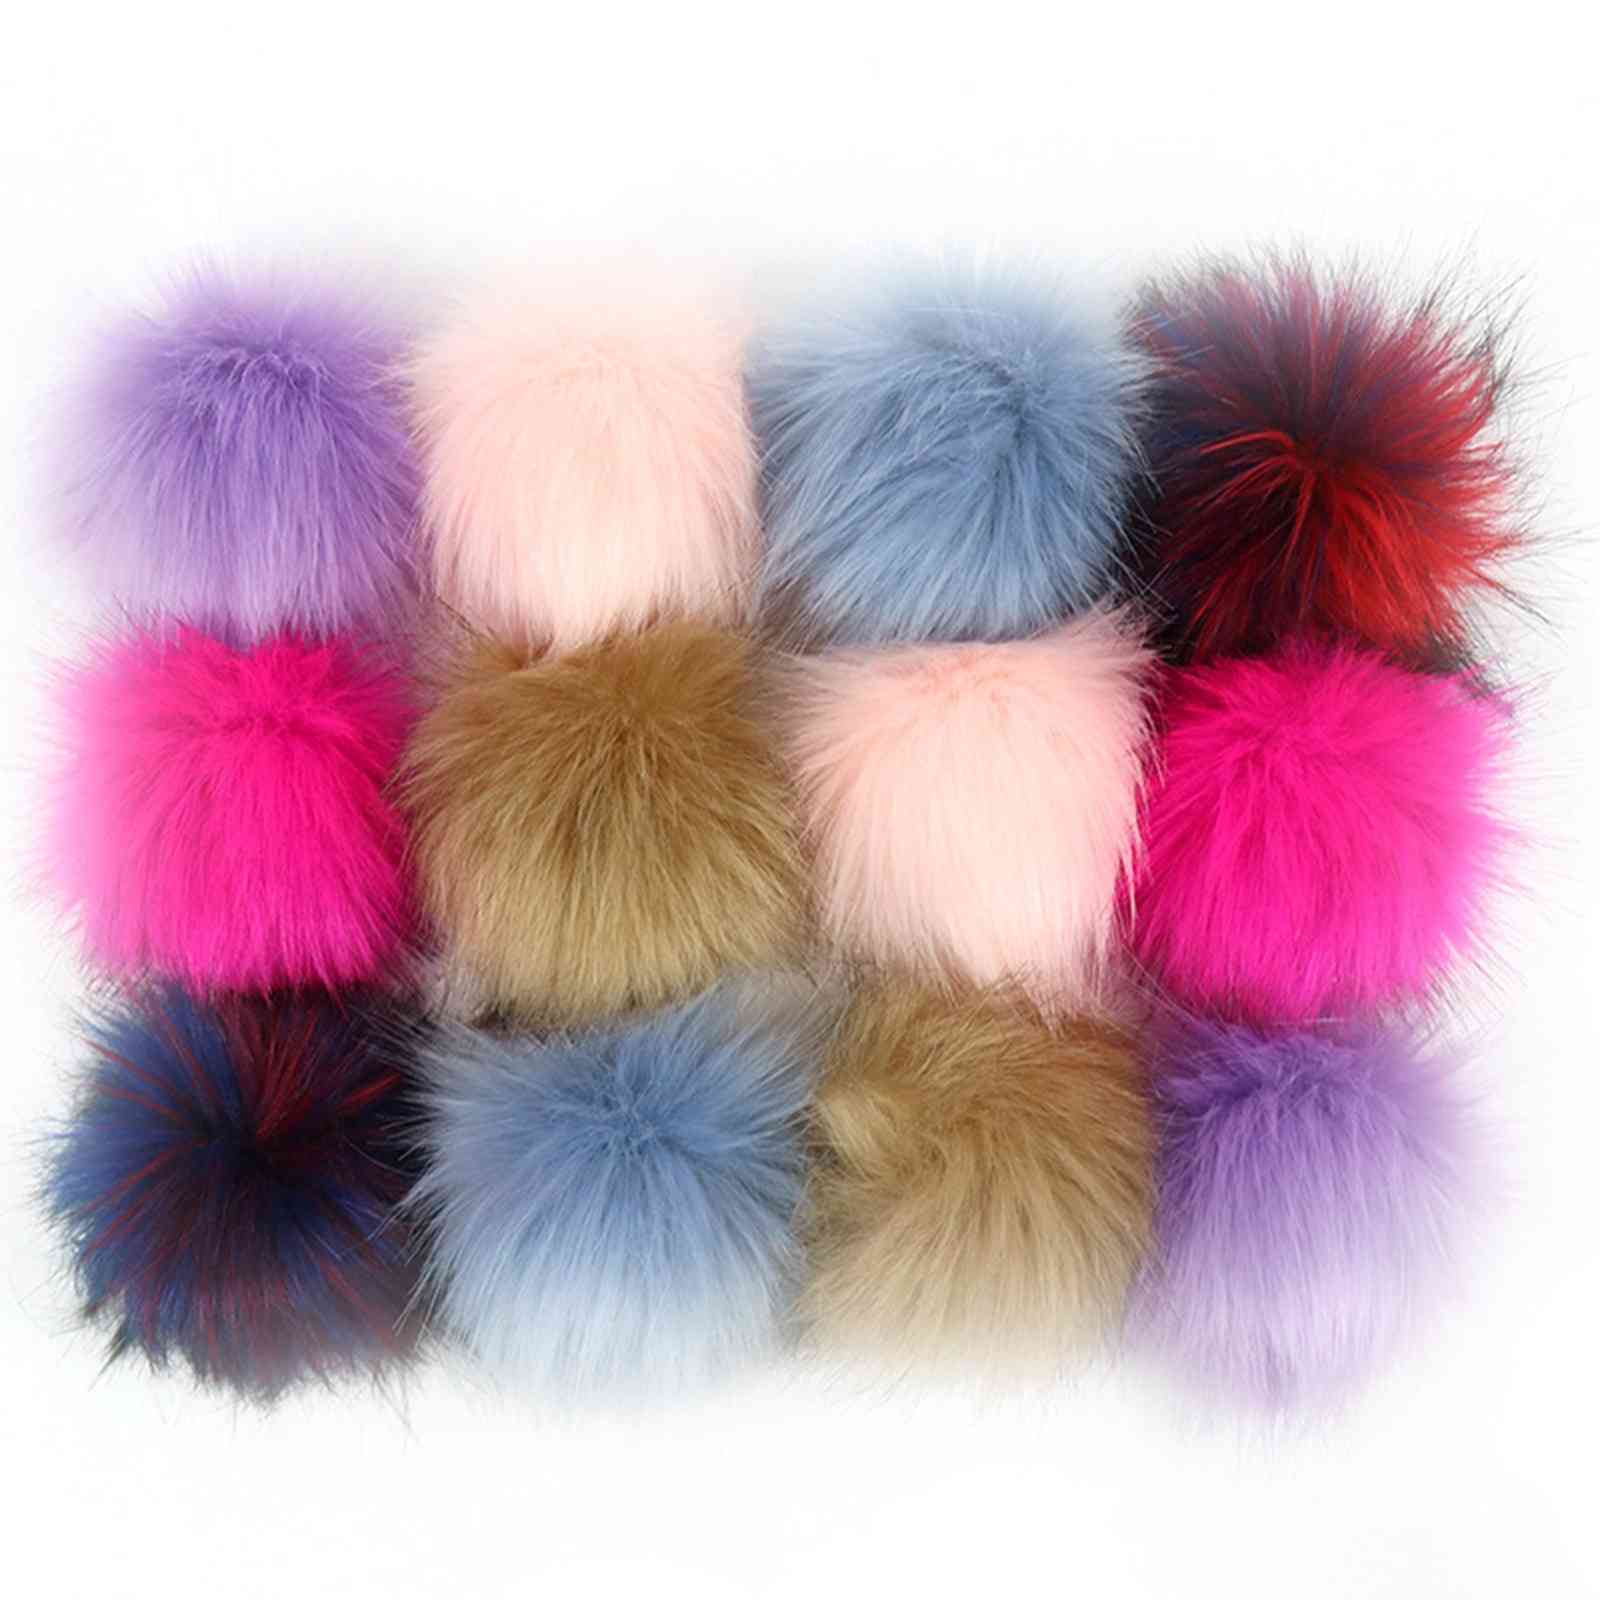 

Mixed Colorful Artificial Fiber Pom Balls Charms Pendant For Jewelry Making Ball Faux Fox Fur 10cm Dia.,12PCs/Packet